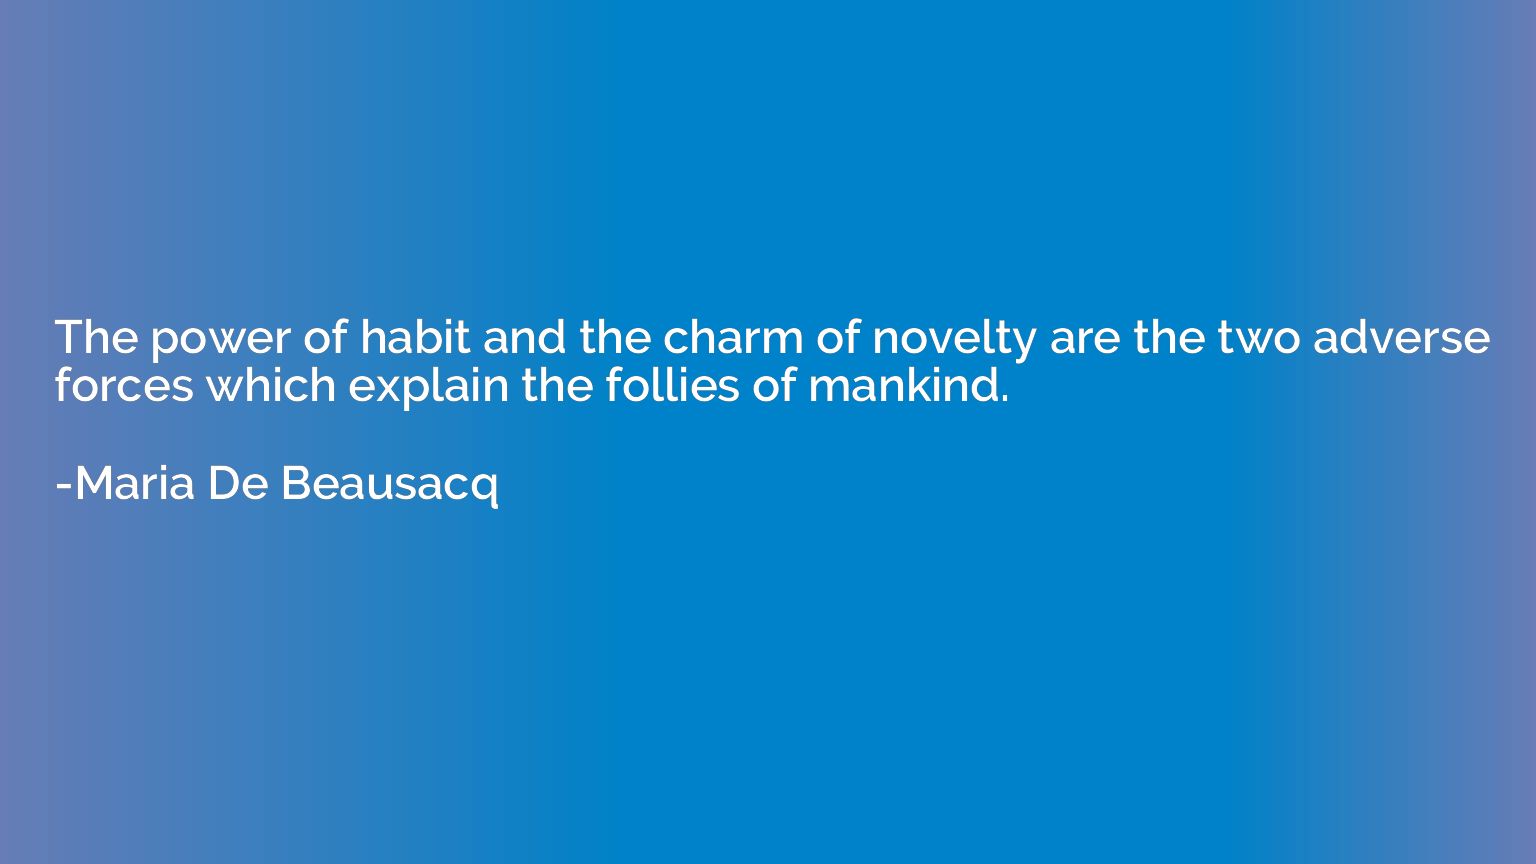 The power of habit and the charm of novelty are the two adve